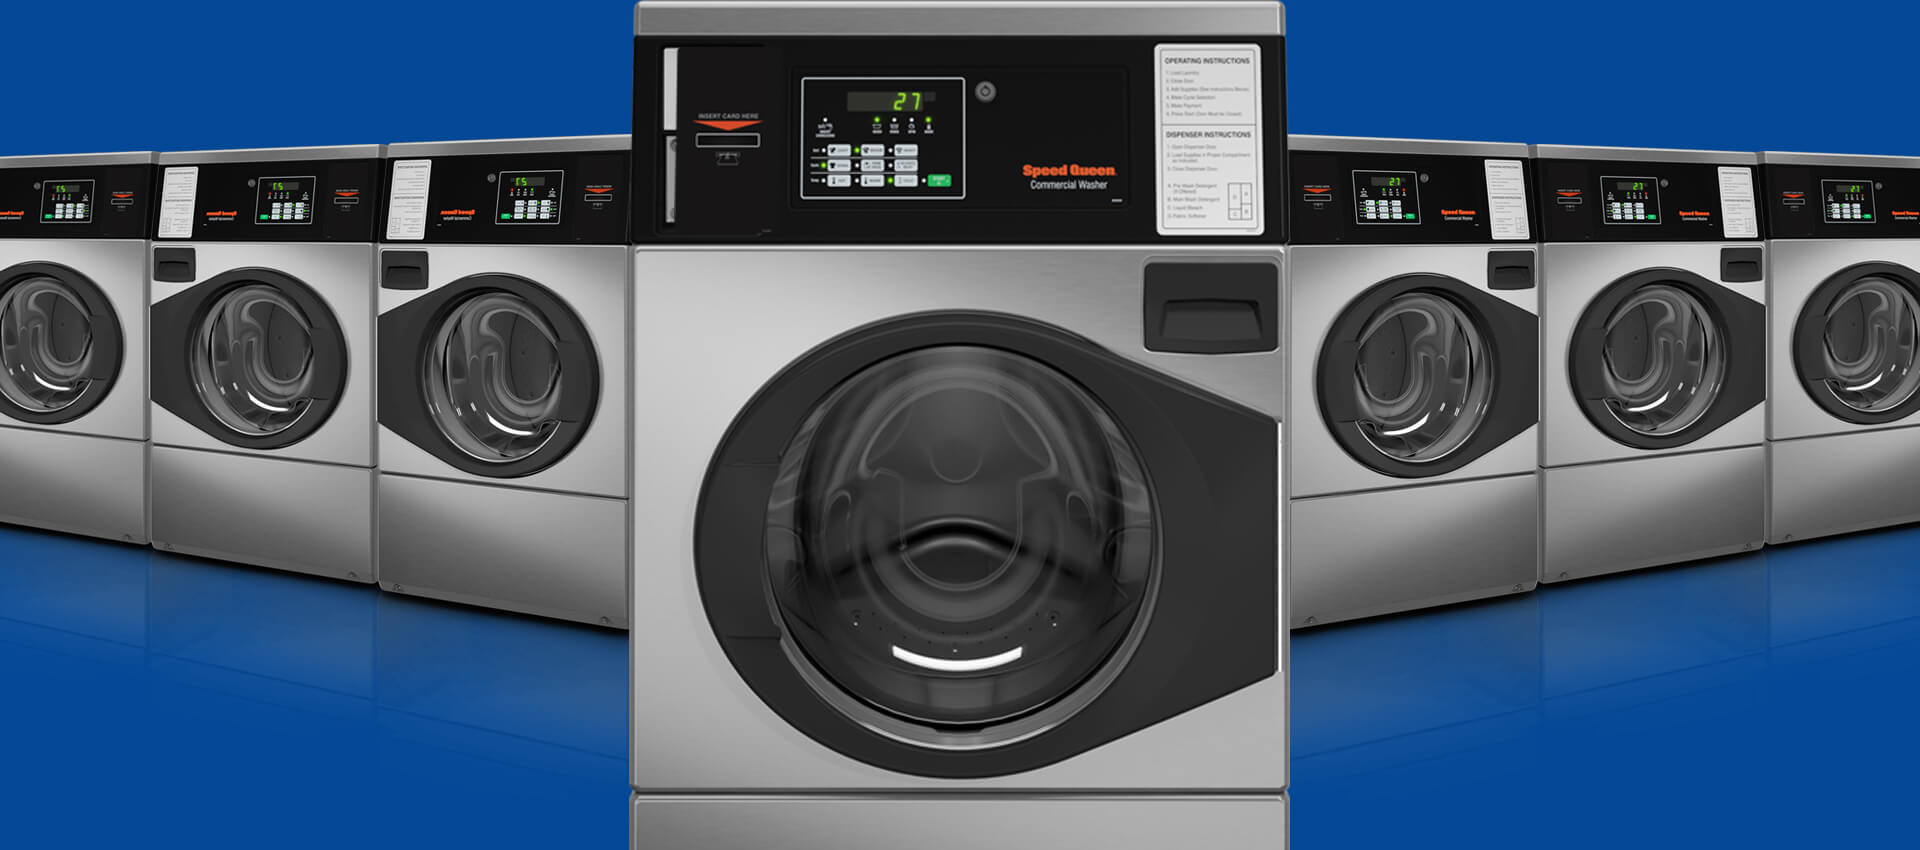 Types of Equipment to Consider for Your Commercial Laundry Room